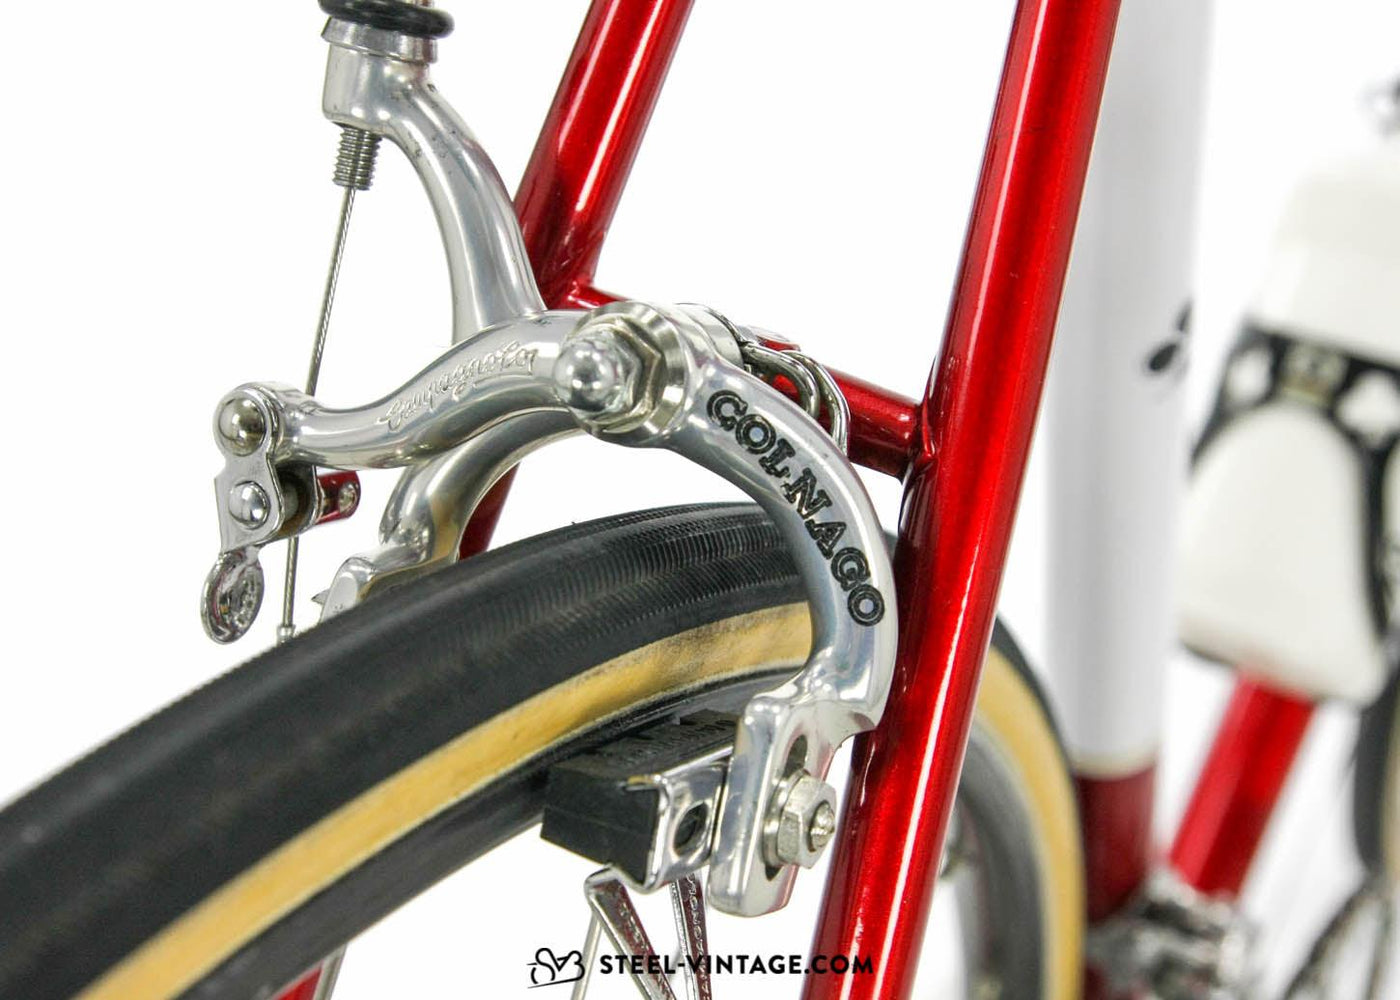 Colnago Super Classic Bicycle from 1972 - Steel Vintage Bikes